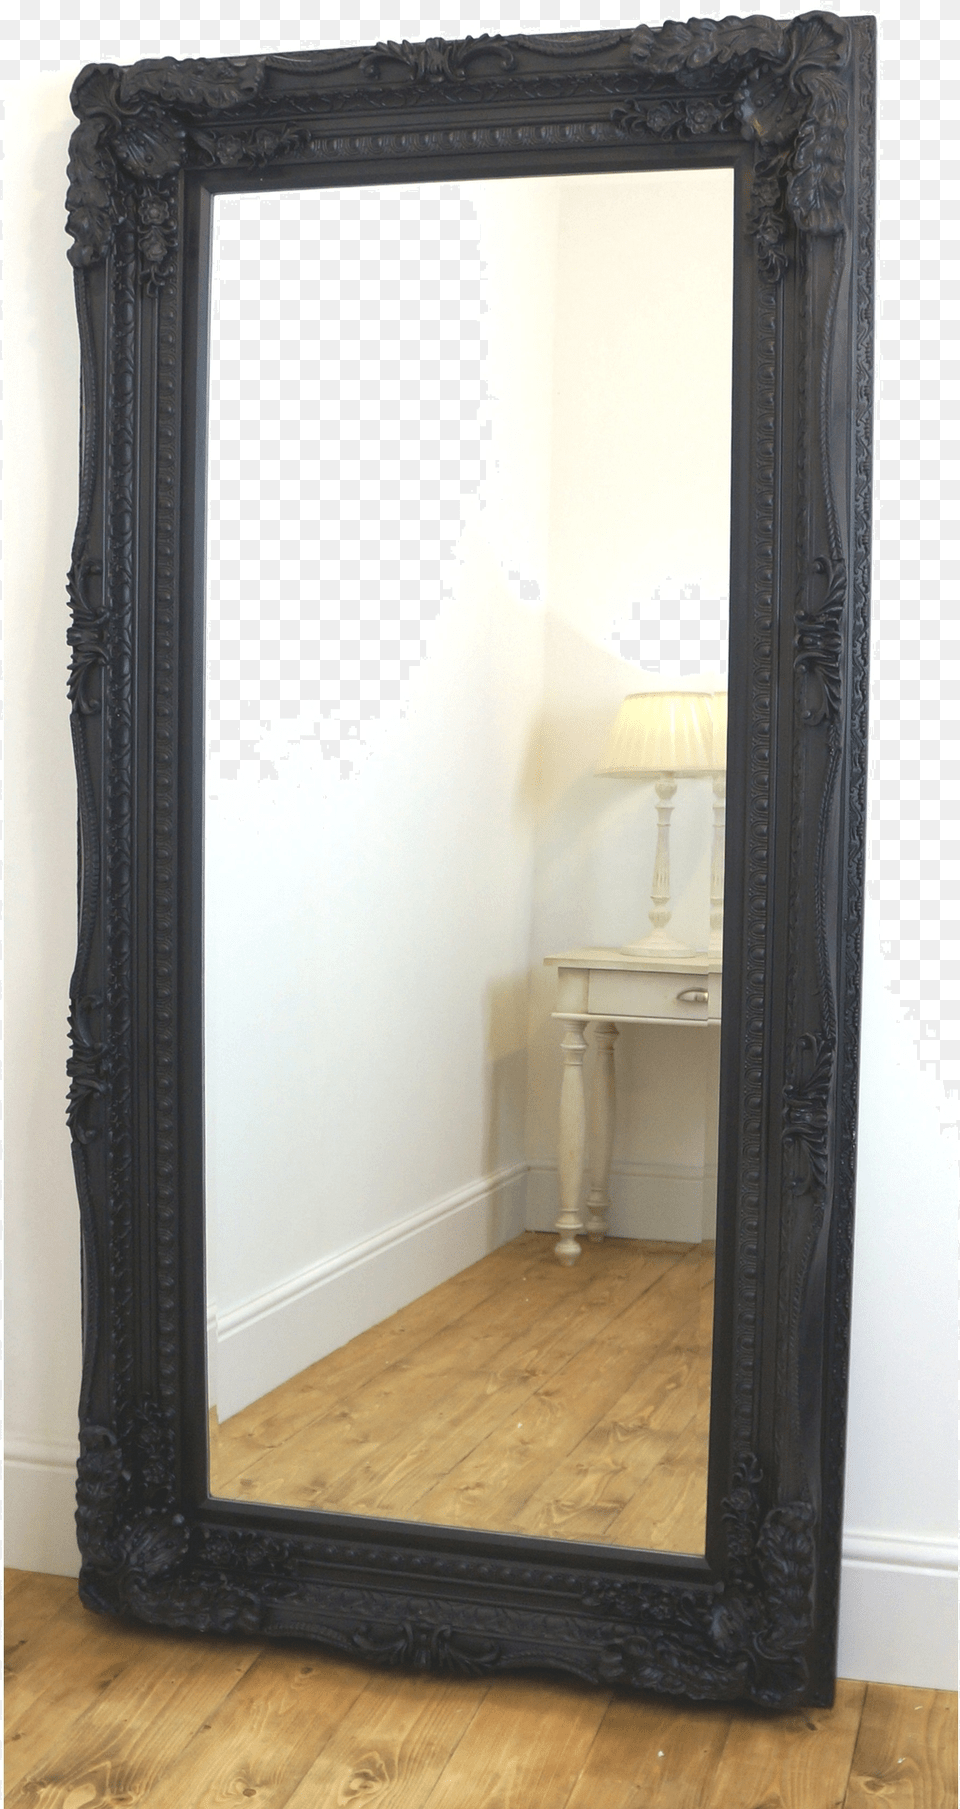 An Overall View Of This Highly Decorative Ornate Mirror Floor Free Transparent Png